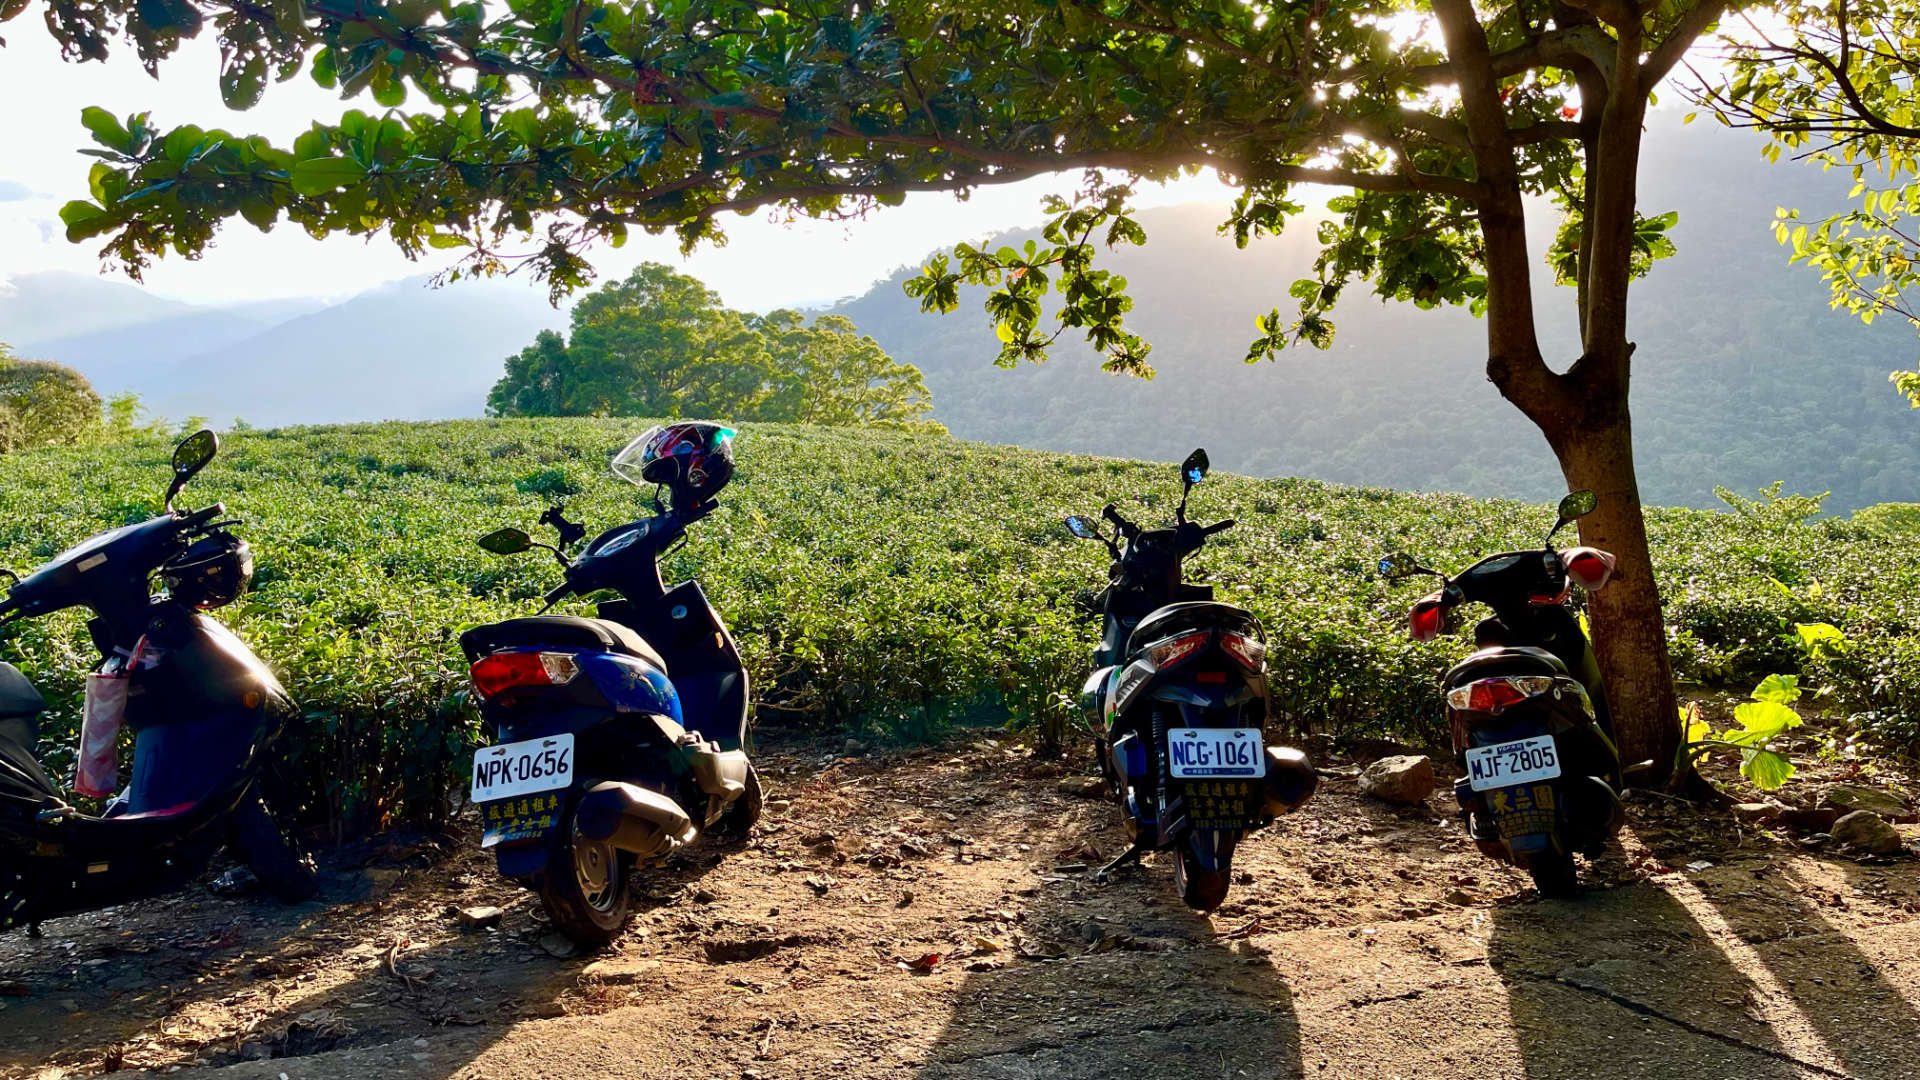 Four scooters parked on dirt under a tree, immediately next to a tea plantation. Tree-covered mountains a visible beyond the tea plantation.